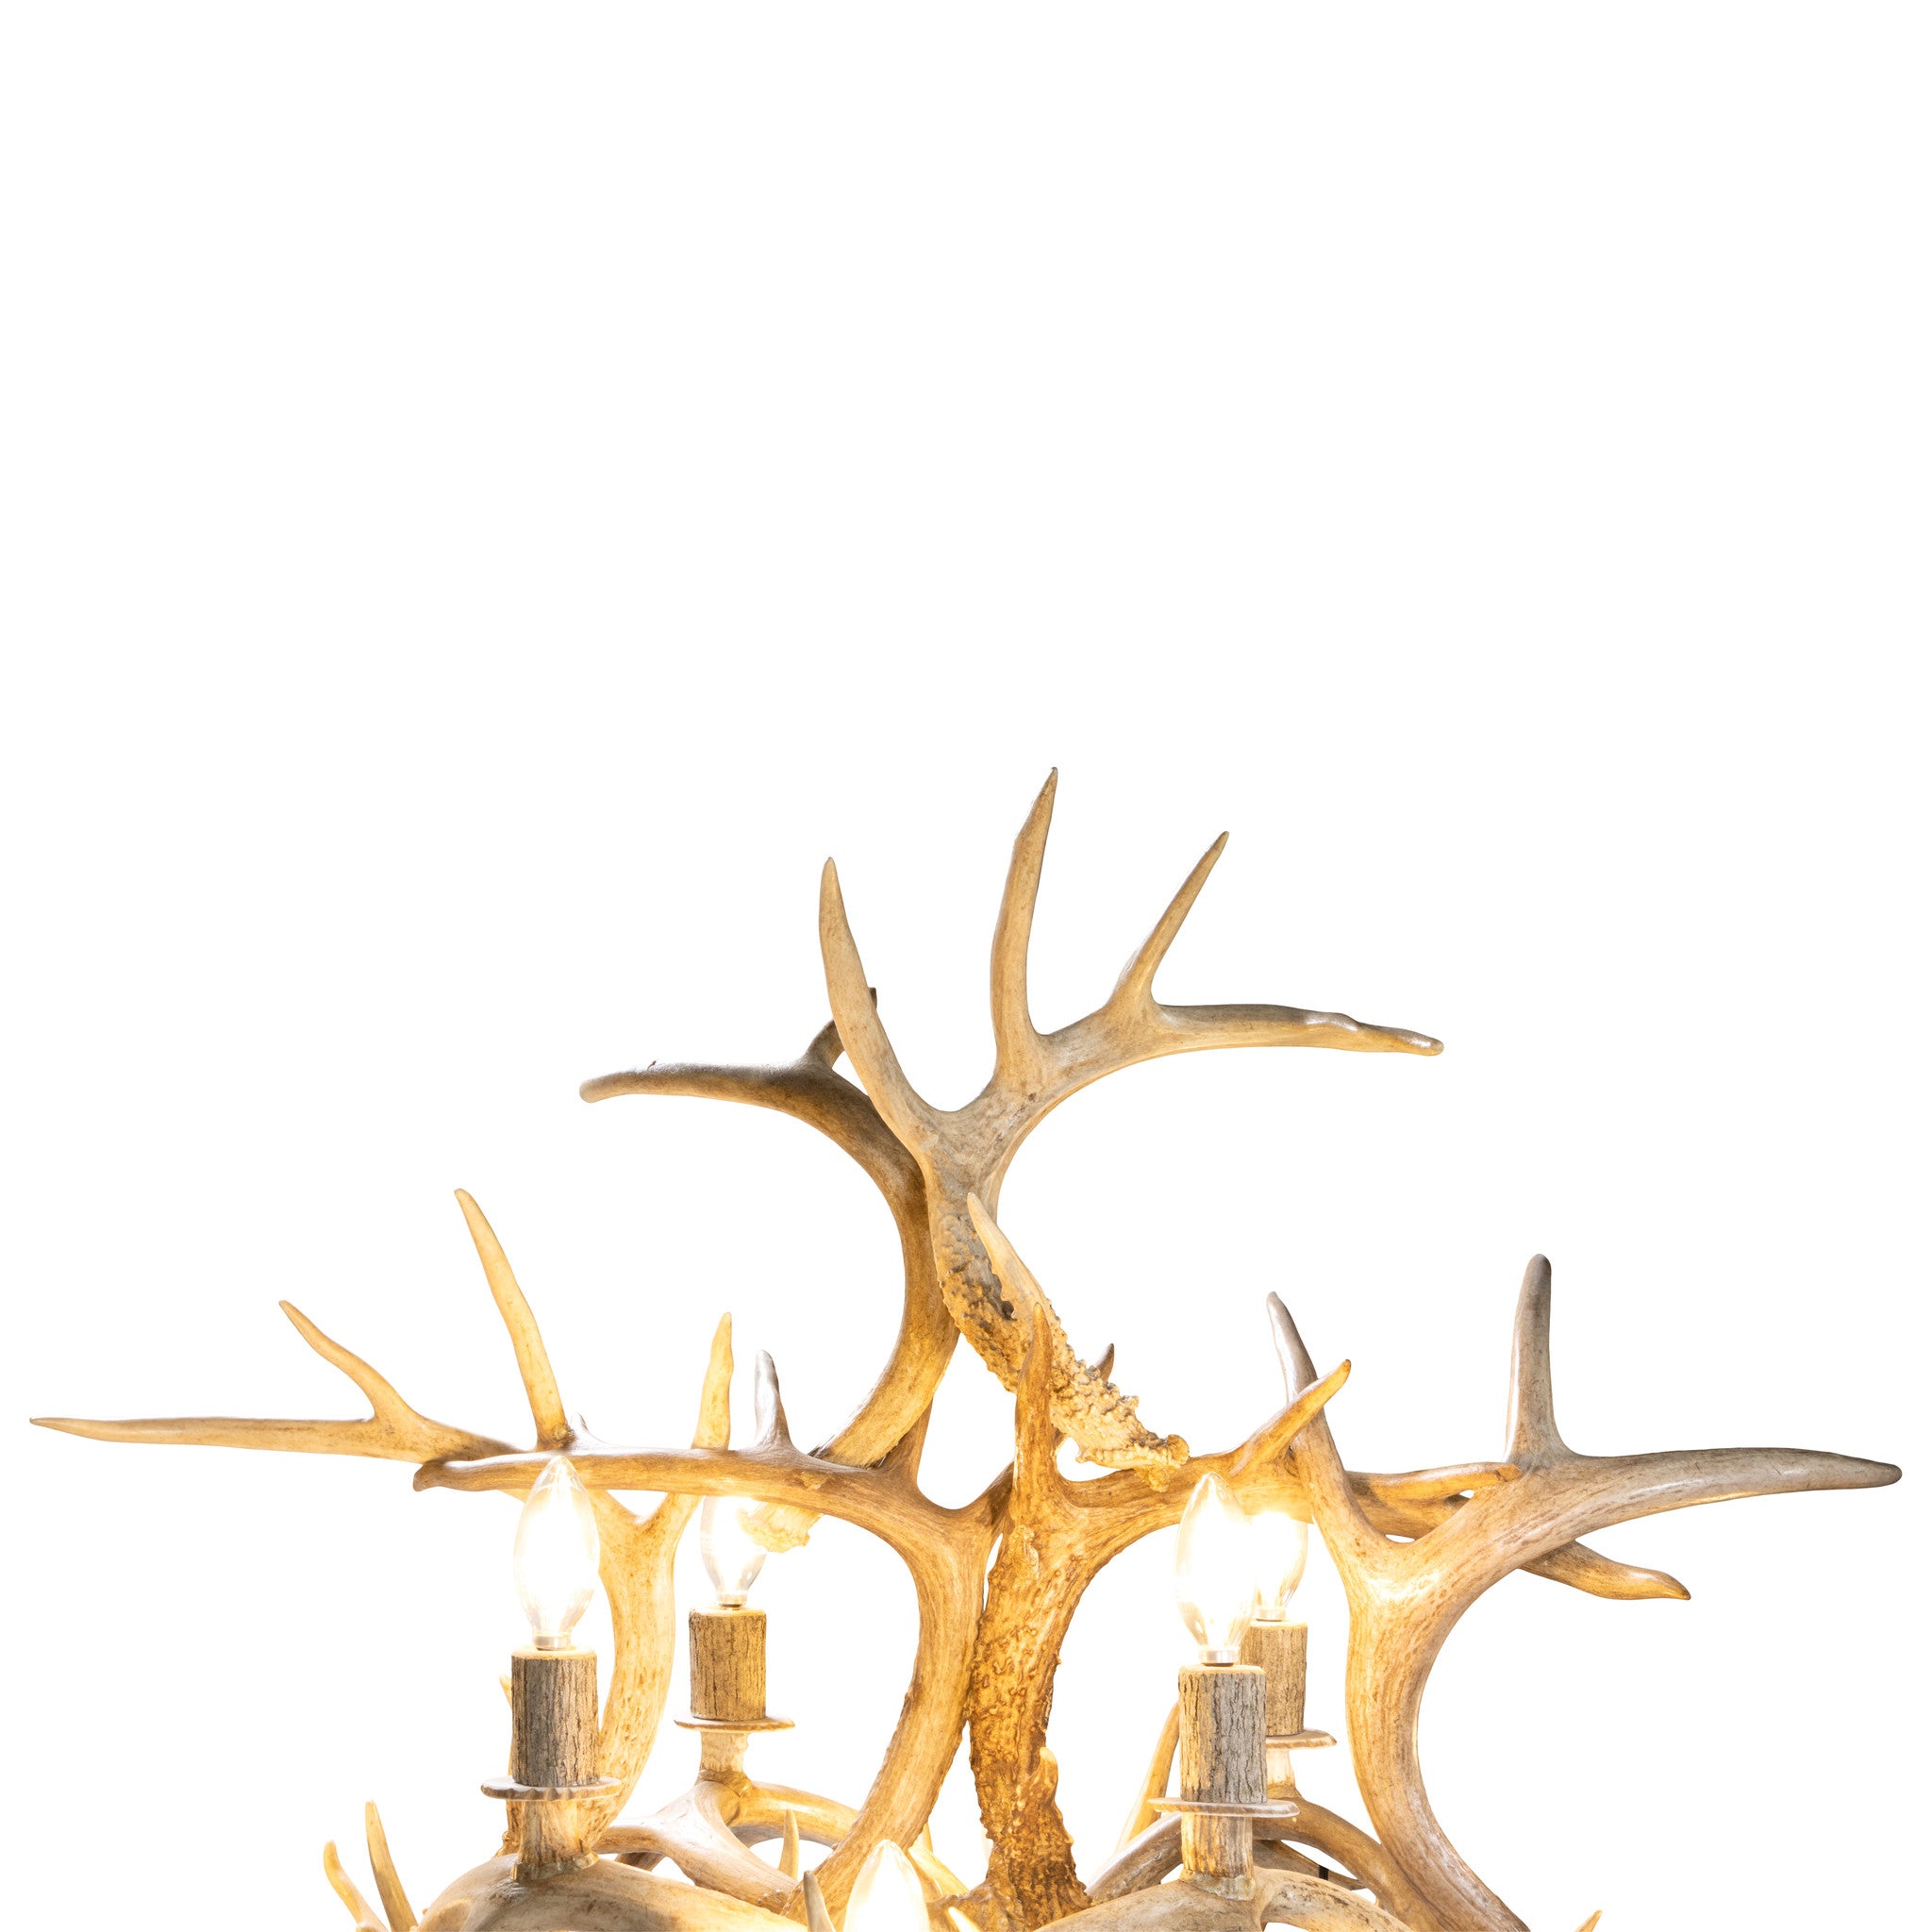 Whitetail Royale Isle Chandelier